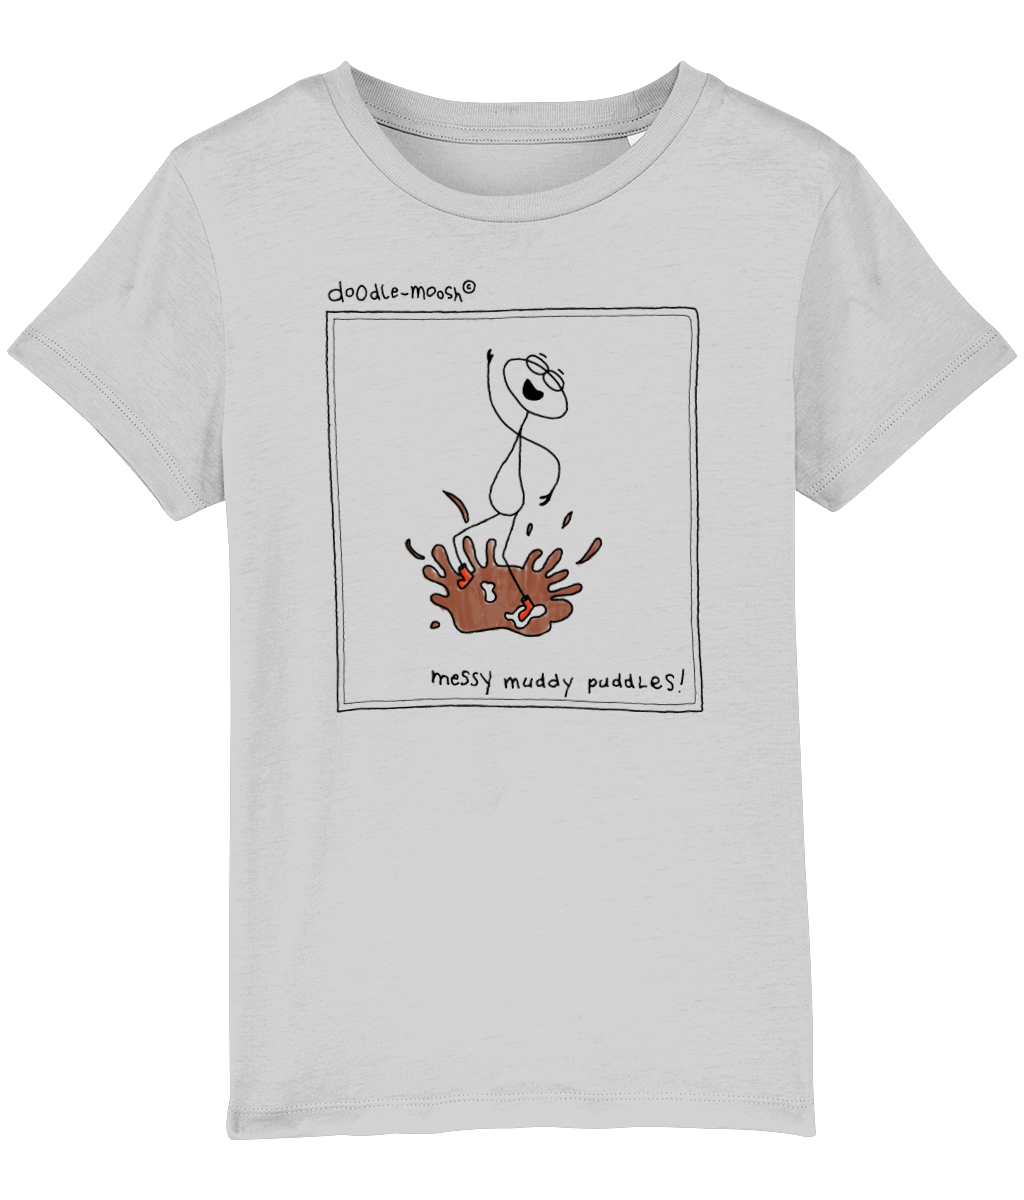 Messy muddy puddles t-shirt, grey with black, colourful drawings